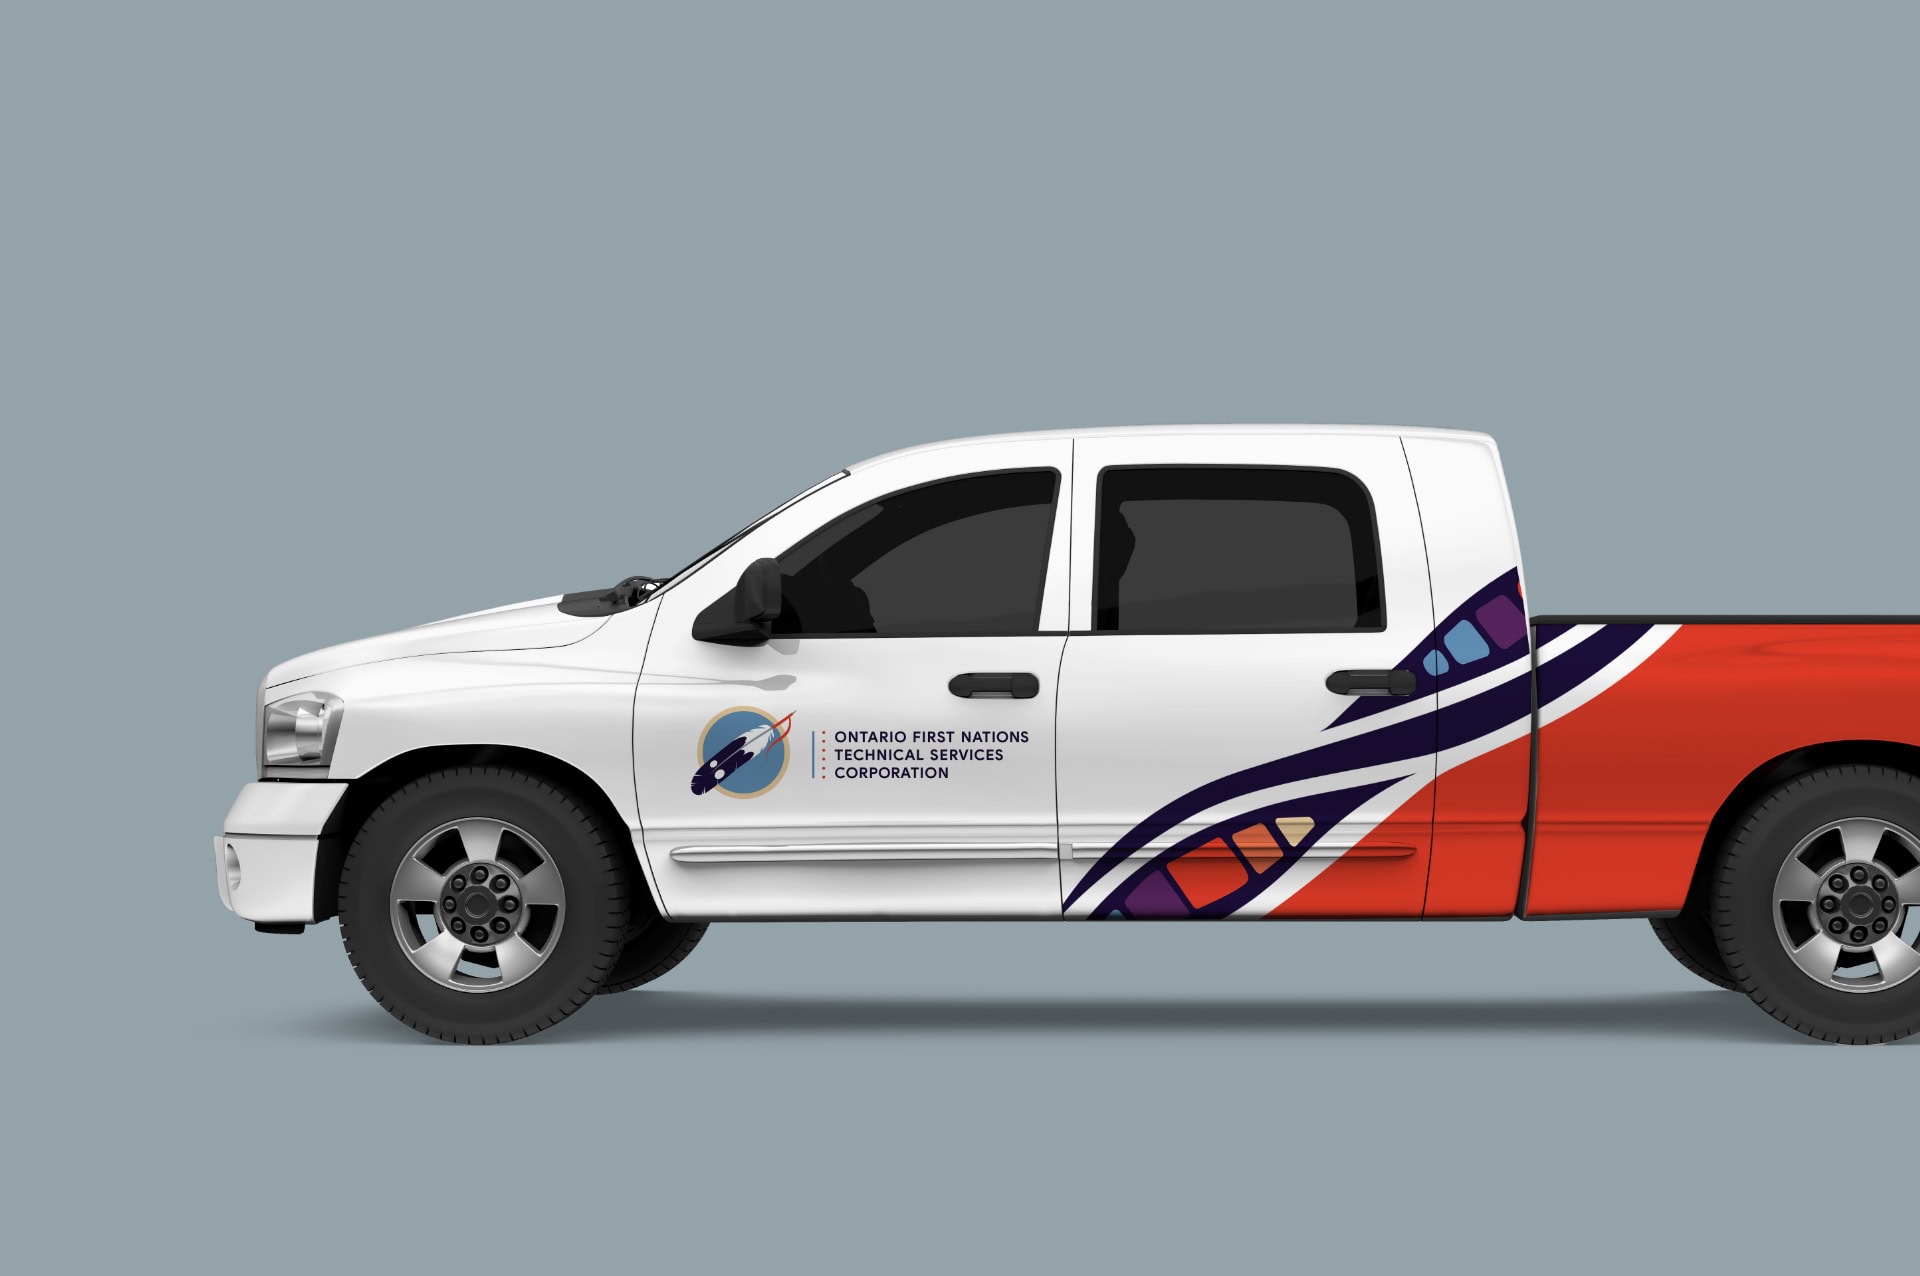 A mockup of a company truck for OFNTSC. Pictured is the drivers side view of the truck. The truck features the OFNTSC logo on the door, on a white background. The back of the truck is orange, in a diagonal reaching to the bottom of the back door. Separating the two sections is one curved line, and two pointed ovals featuring colour blocks of yellow, orange, red, and deep purple in one, and deep purple and blue in the other, separated into sections by black lines.